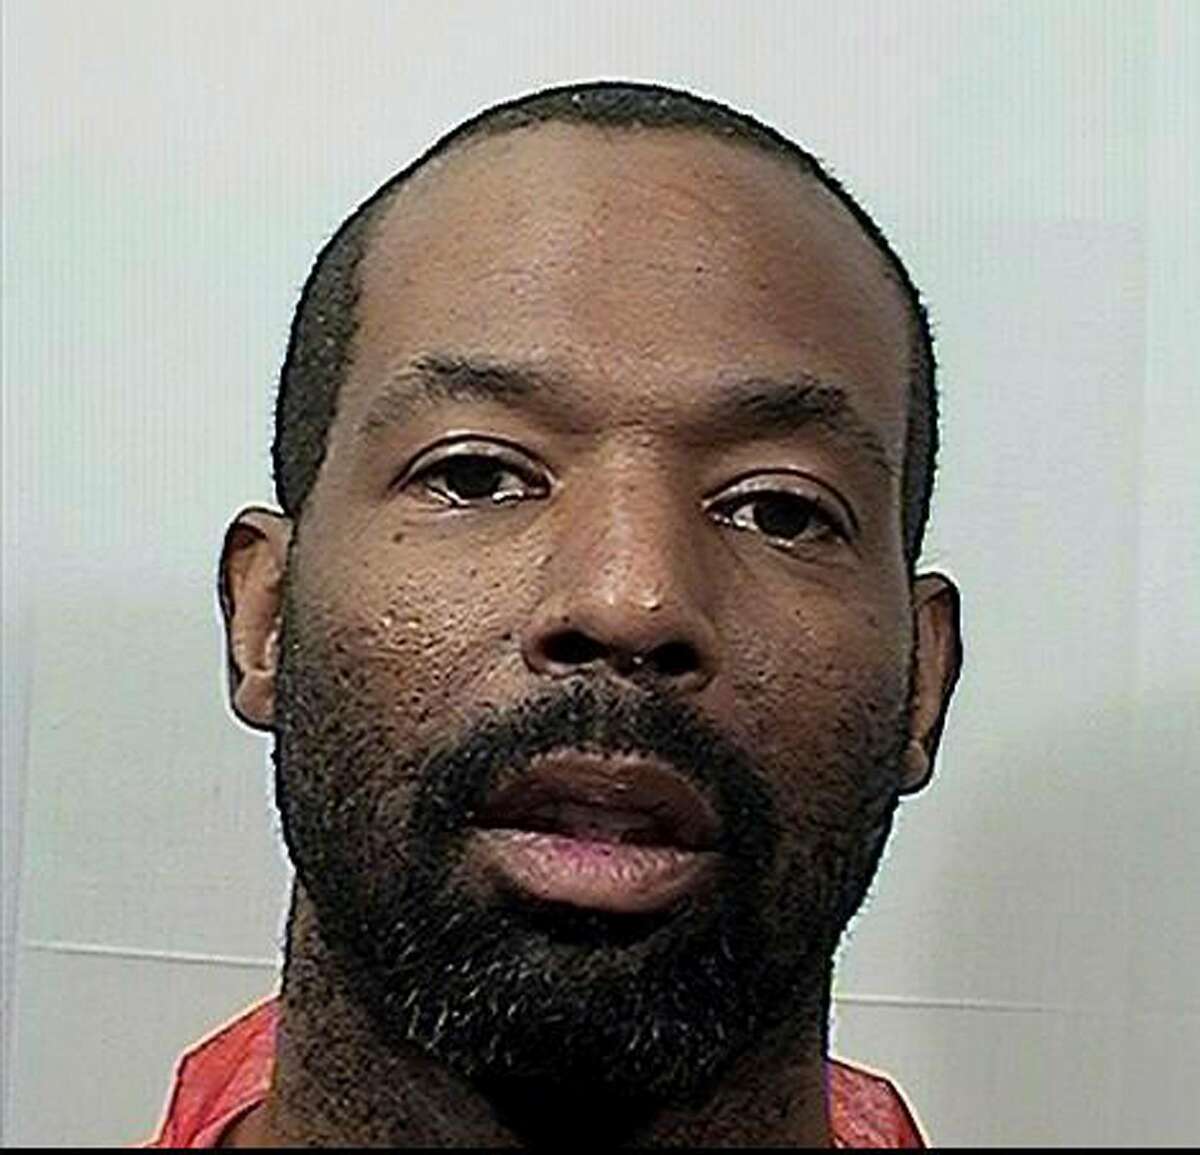 In this March 20, 2018, photo released by the California Department of Corrections and Rehabilitation is Napoleon Brown. San Francisco's mayor has joined other members of her family in requesting an early release from prison for an older brother who has served nearly two decades of a 44-year sentence on a manslaughter conviction. Mayor London Breed sent a letter to outgoing Gov. Jerry Brown in late October asking him to "consider leniency" and commute the sentence of Napoleon Brown, who struggled with drugs from a young age, the San Francisco Chronicle reported Wednesday, Dec. 19, 2018. (California Department of Corrections and Rehabilitation via AP)